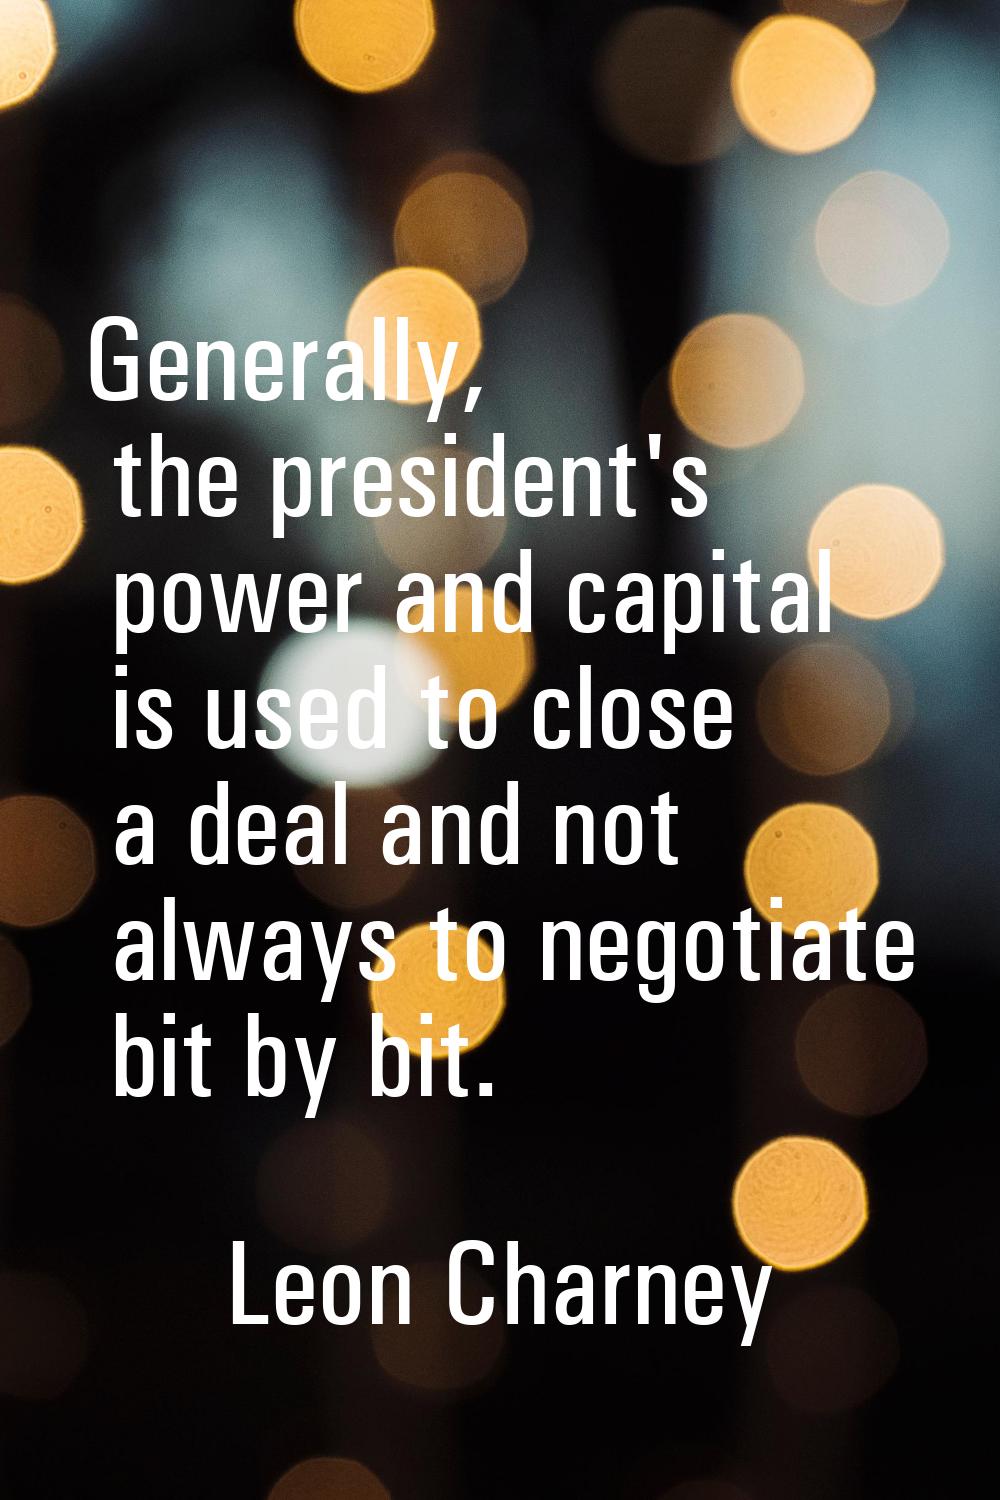 Generally, the president's power and capital is used to close a deal and not always to negotiate bi